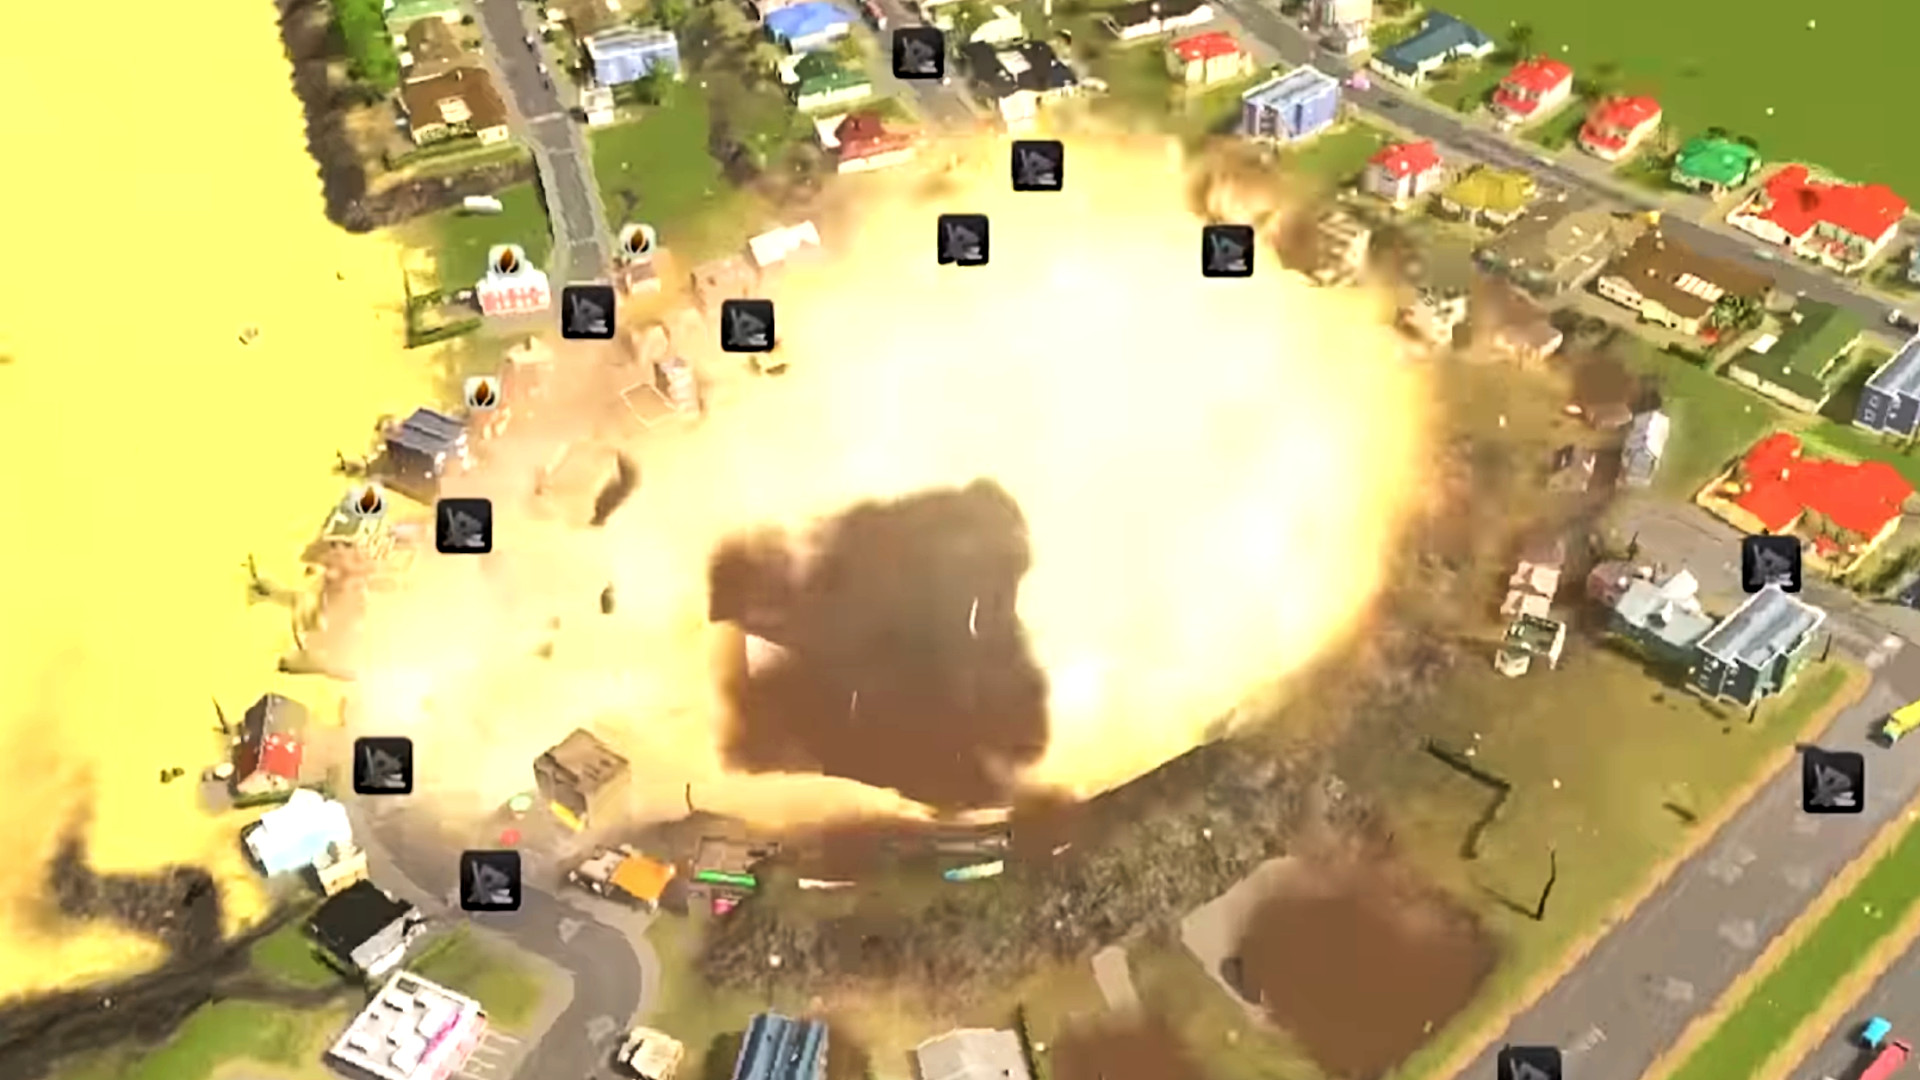 This meteor-filled Cities Skylines build is impressively chaotic